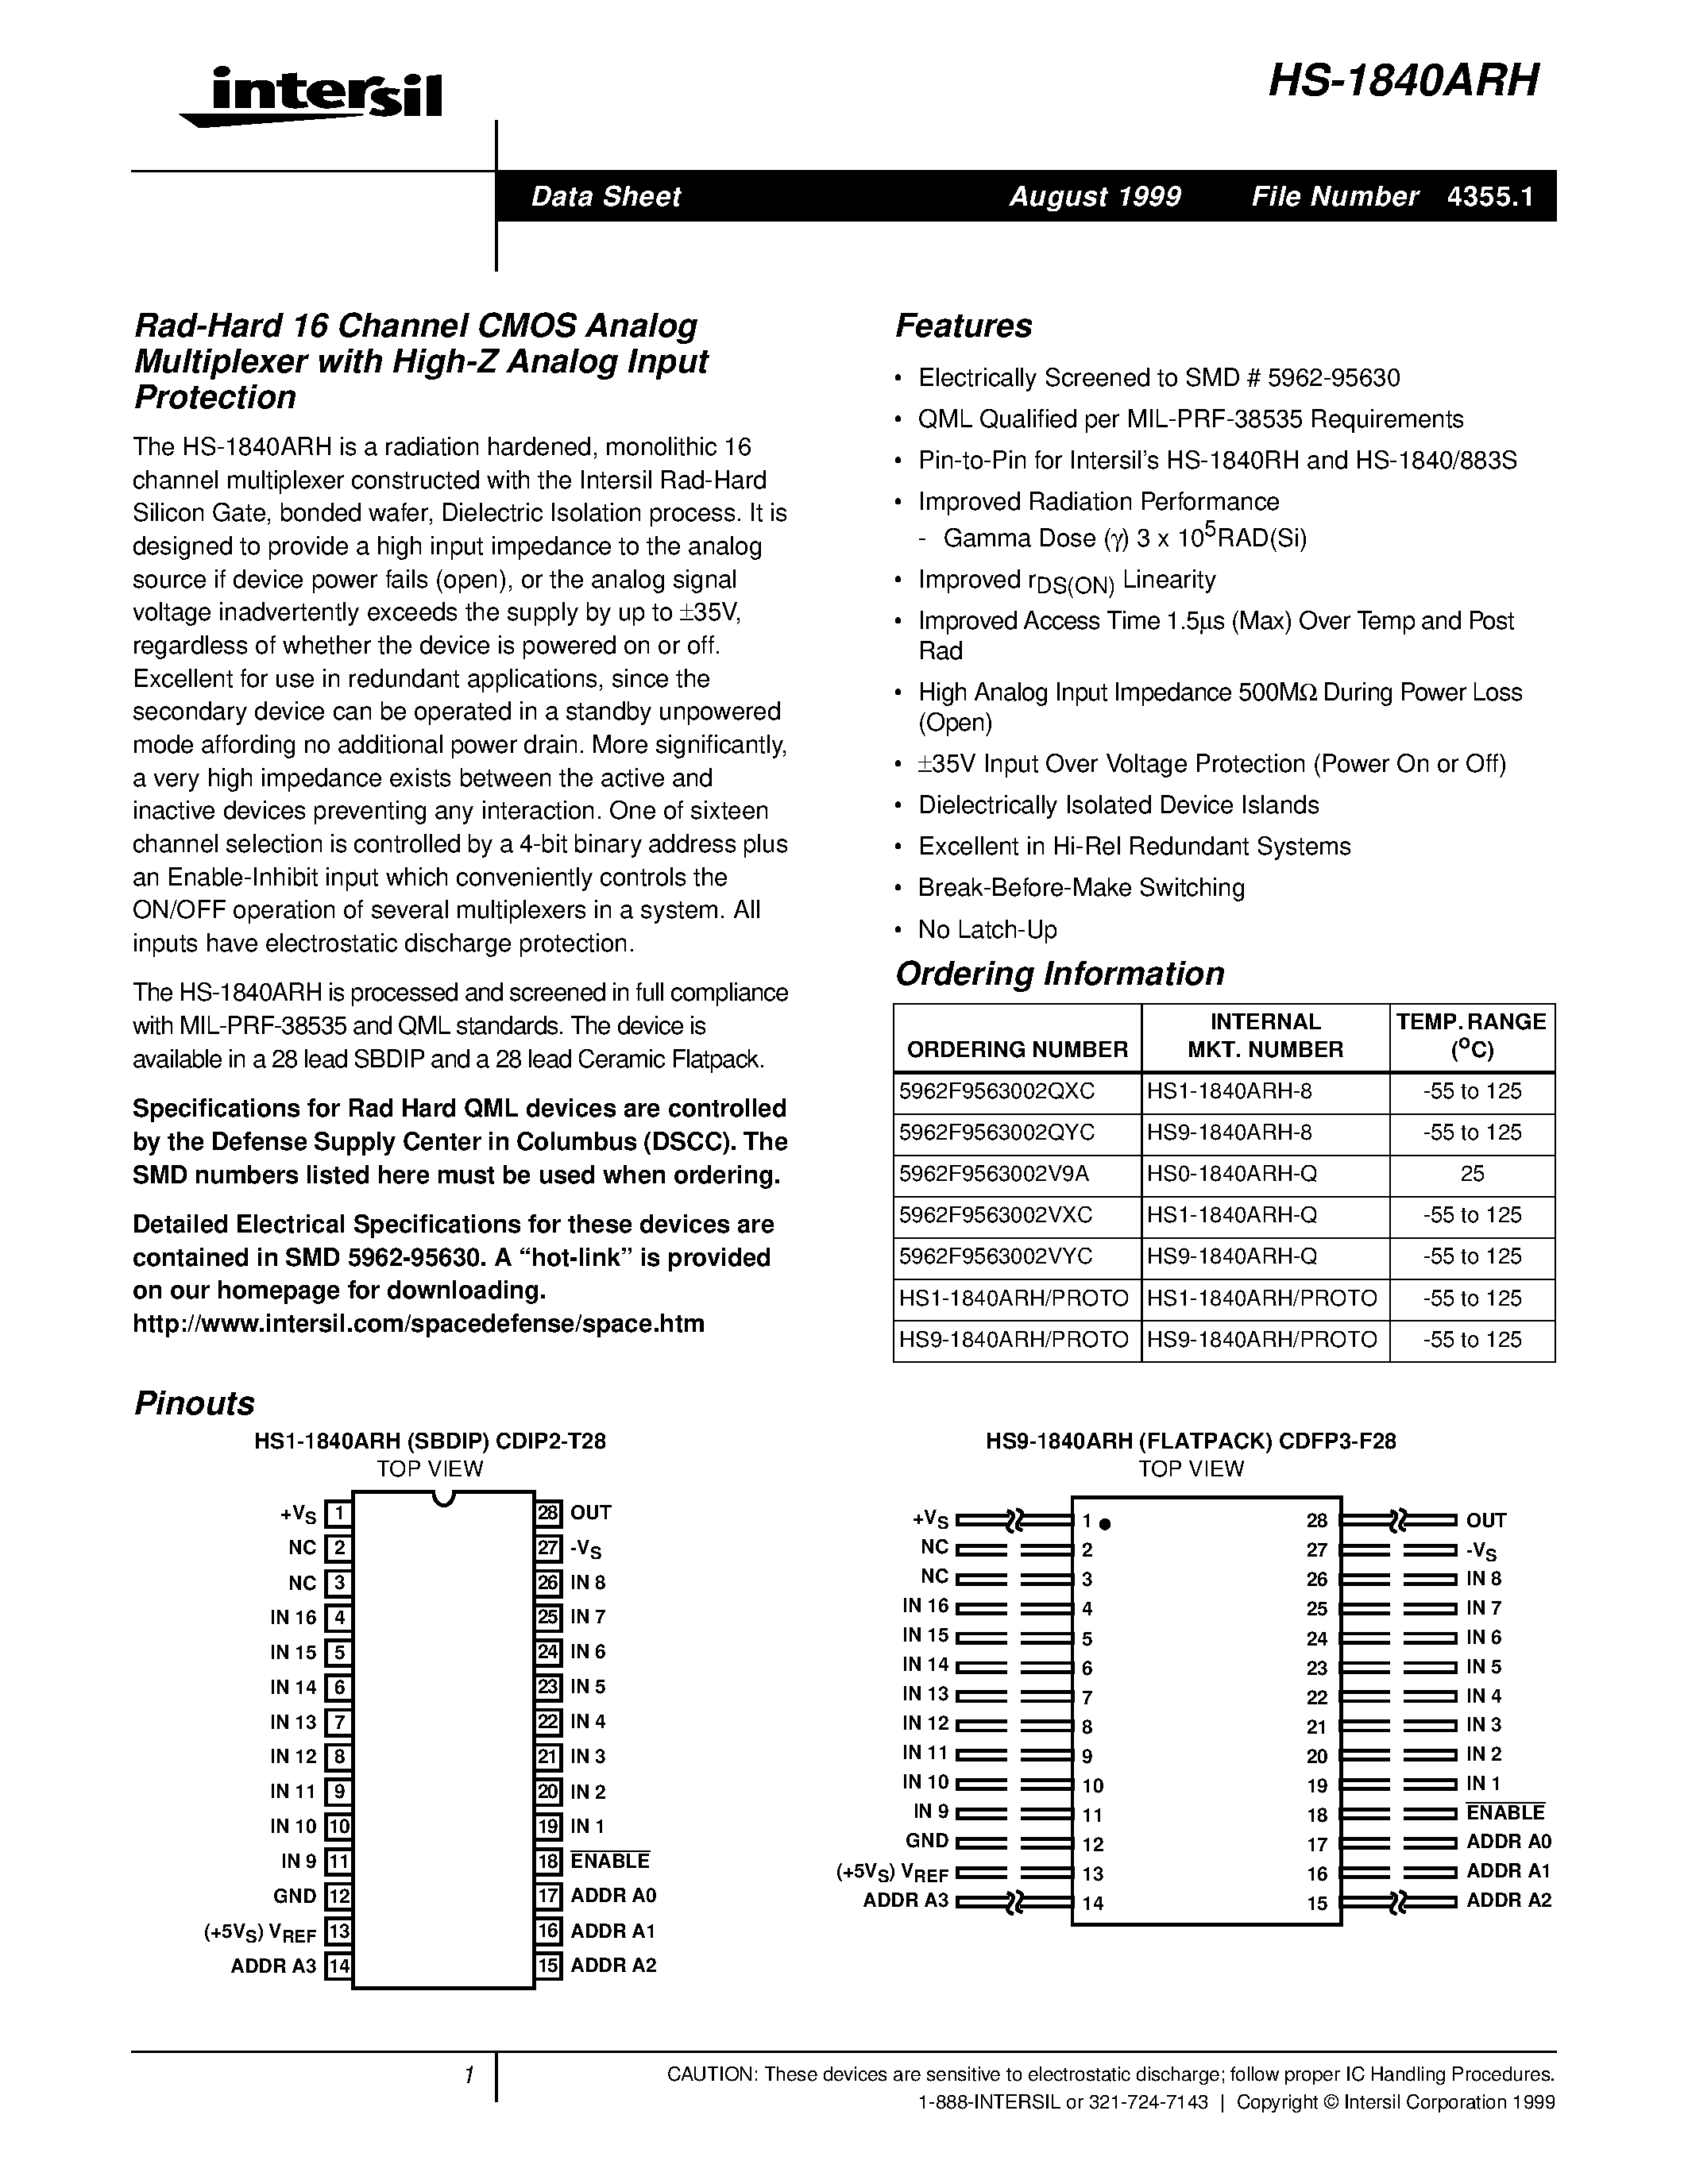 Datasheet HS1-1840ARH-Q - Rad-Hard 16 Channel CMOS Analog Multiplexer with High-Z Analog Input Protection page 1